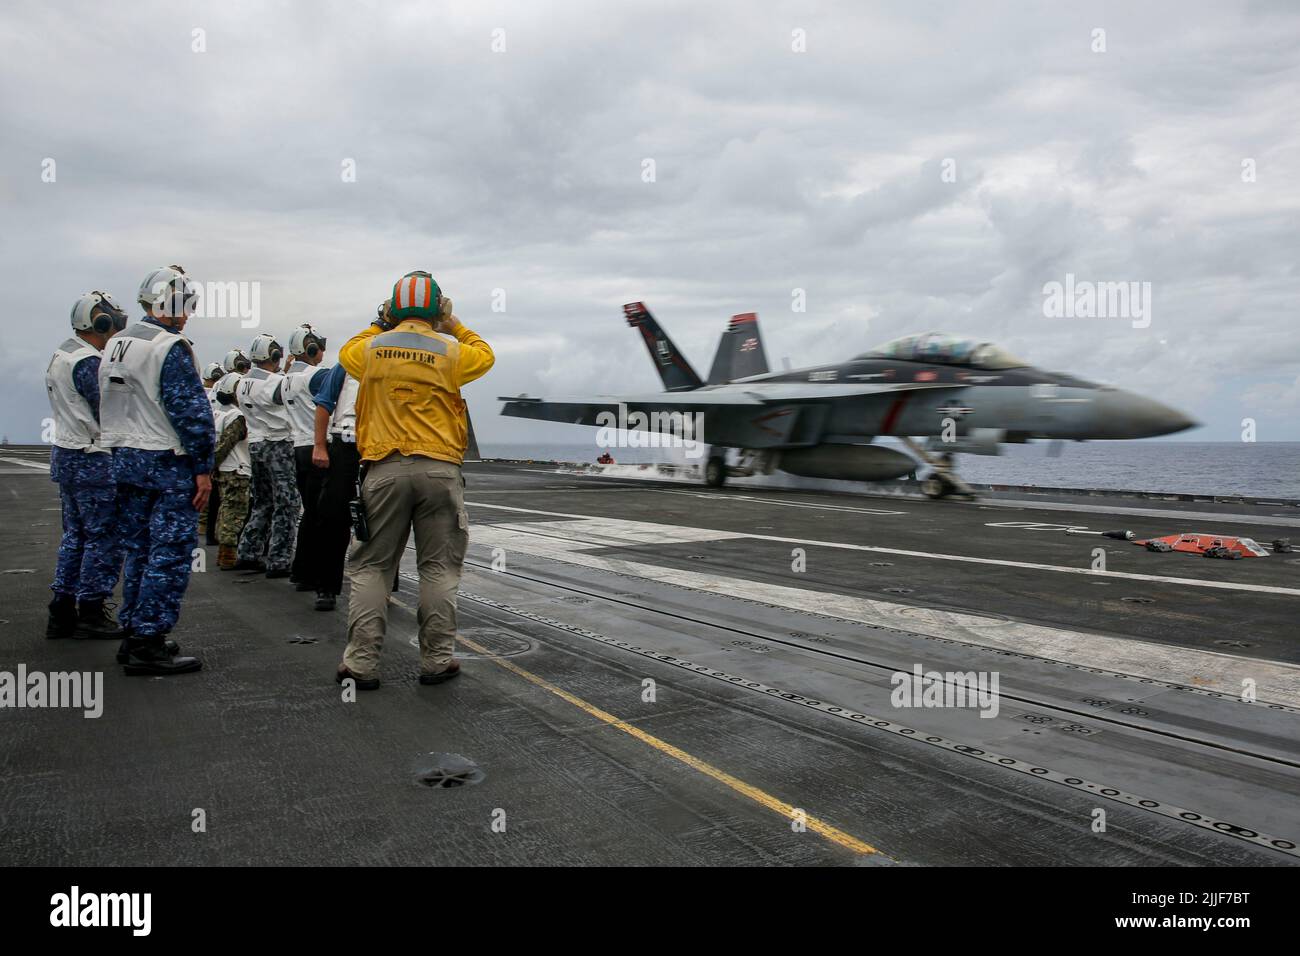 220723-N-MM912-2089 PACIFIC OCEAN (July 23, 2022) Military leaders from Japan, Australia, and Canada observe an F/A-18F Super Hornet, assigned to the 'Black Aces' of Strike Fighter Squadron (VFA) 41, launch from the flight deck of the Nimitz-class aircraft carrier USS Abraham Lincoln (CVN 72) during Rim of the Pacific (RIMPAC) 2022. Twenty-six nations, 38 ships, three submarines, more than 170 aircraft and 25,000 personnel are participating in RIMPAC from June 29 to Aug. 4 in and around the Hawaiian Islands and Southern California. The world’s largest international maritime exercise, RIMPAC pr Stock Photo